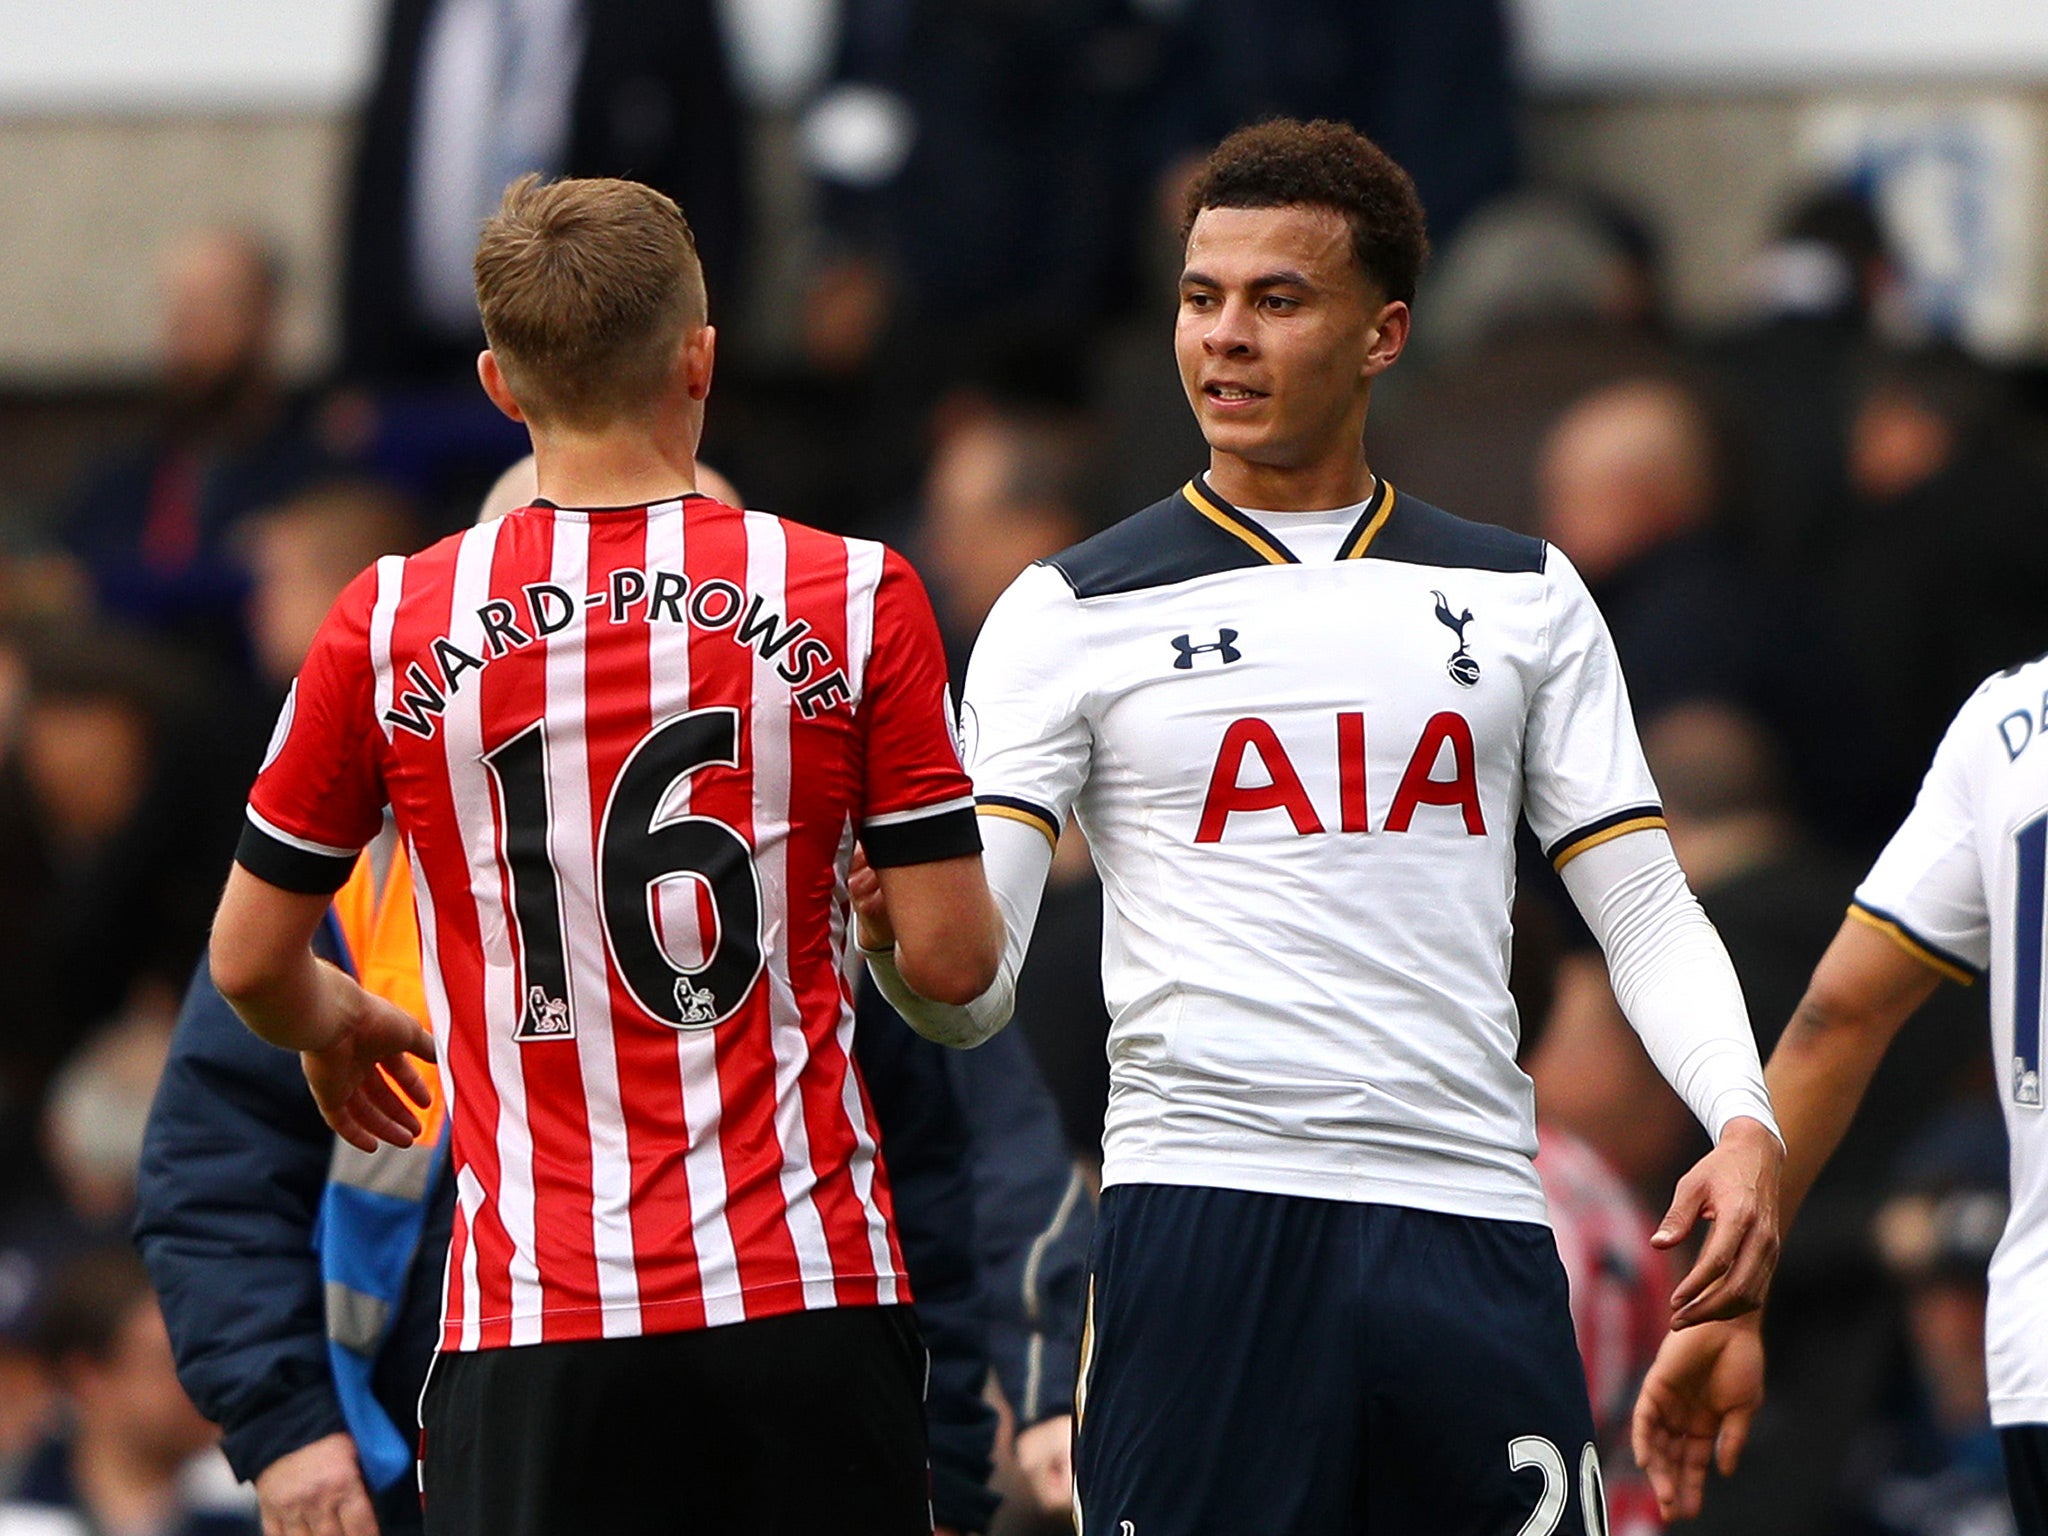 Dele Alli has been playing higher up the pitch in Mauricio Pochettino's system this season